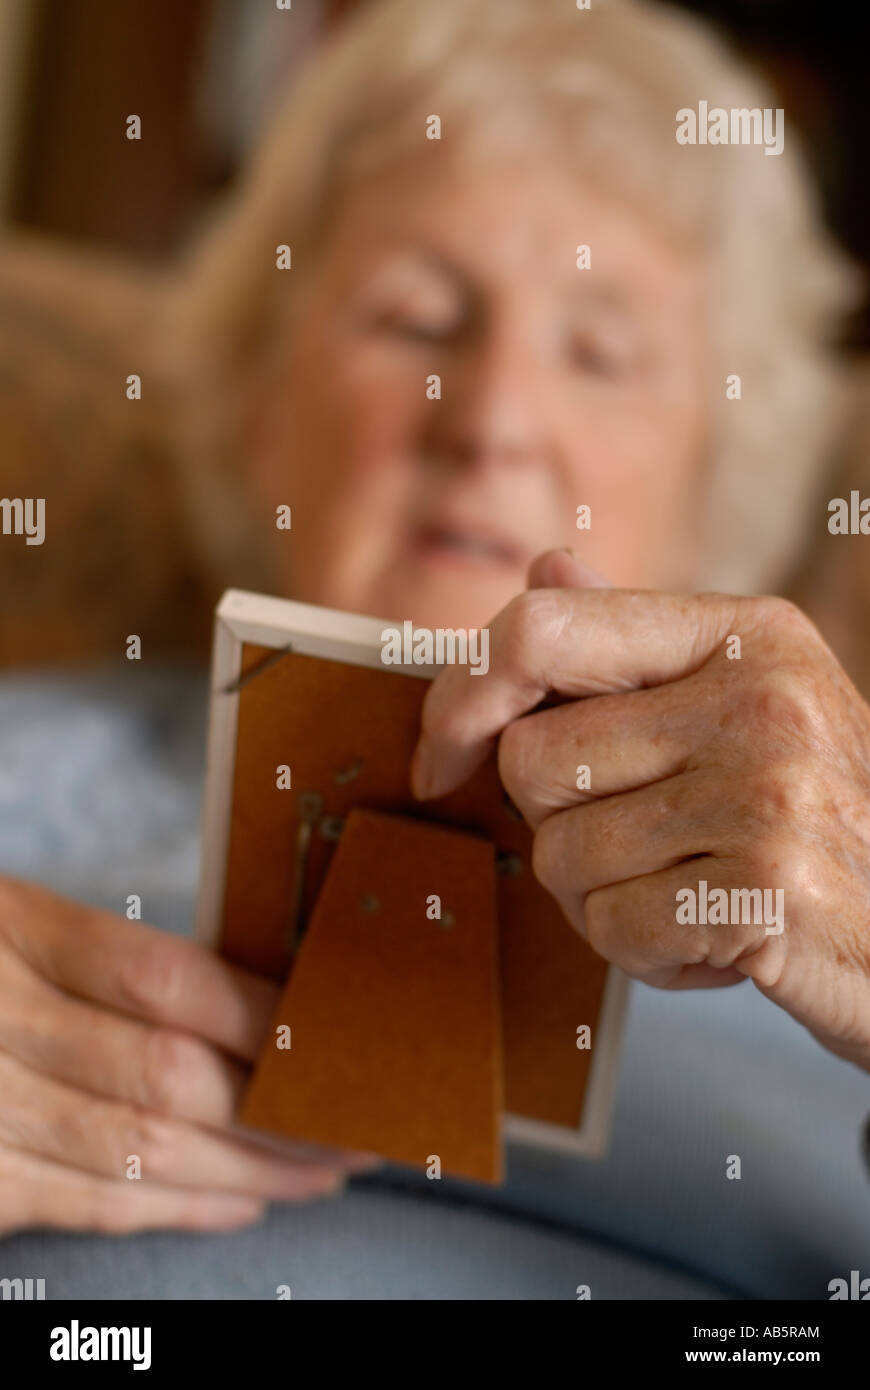 Elderly lady seated looking at old photograph reminiscing looking lonely Stock Photo